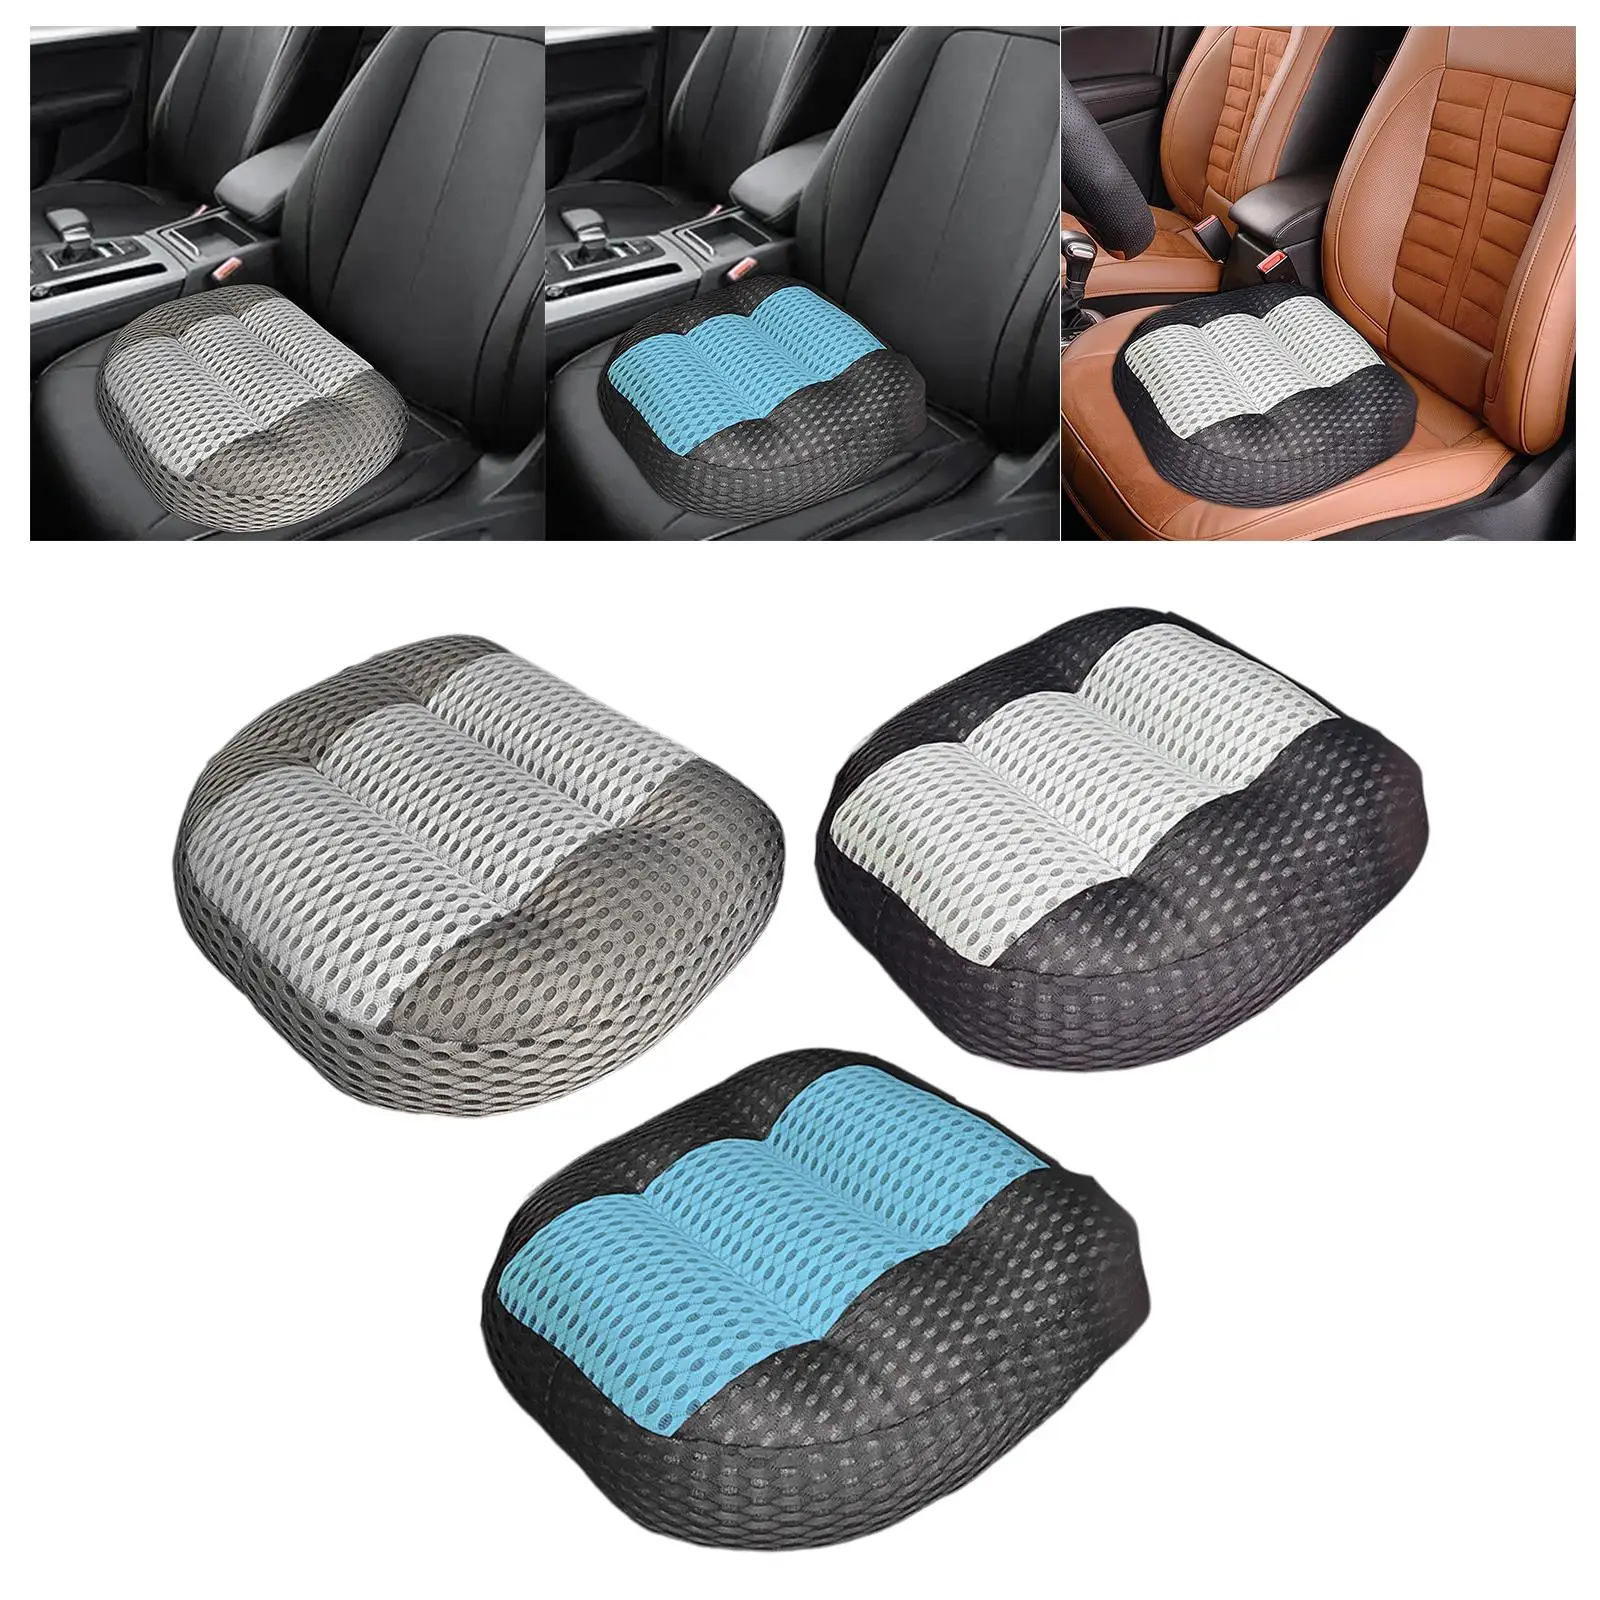 Car Seat Booster Cushion Portable Seat Cushion For Car And Office